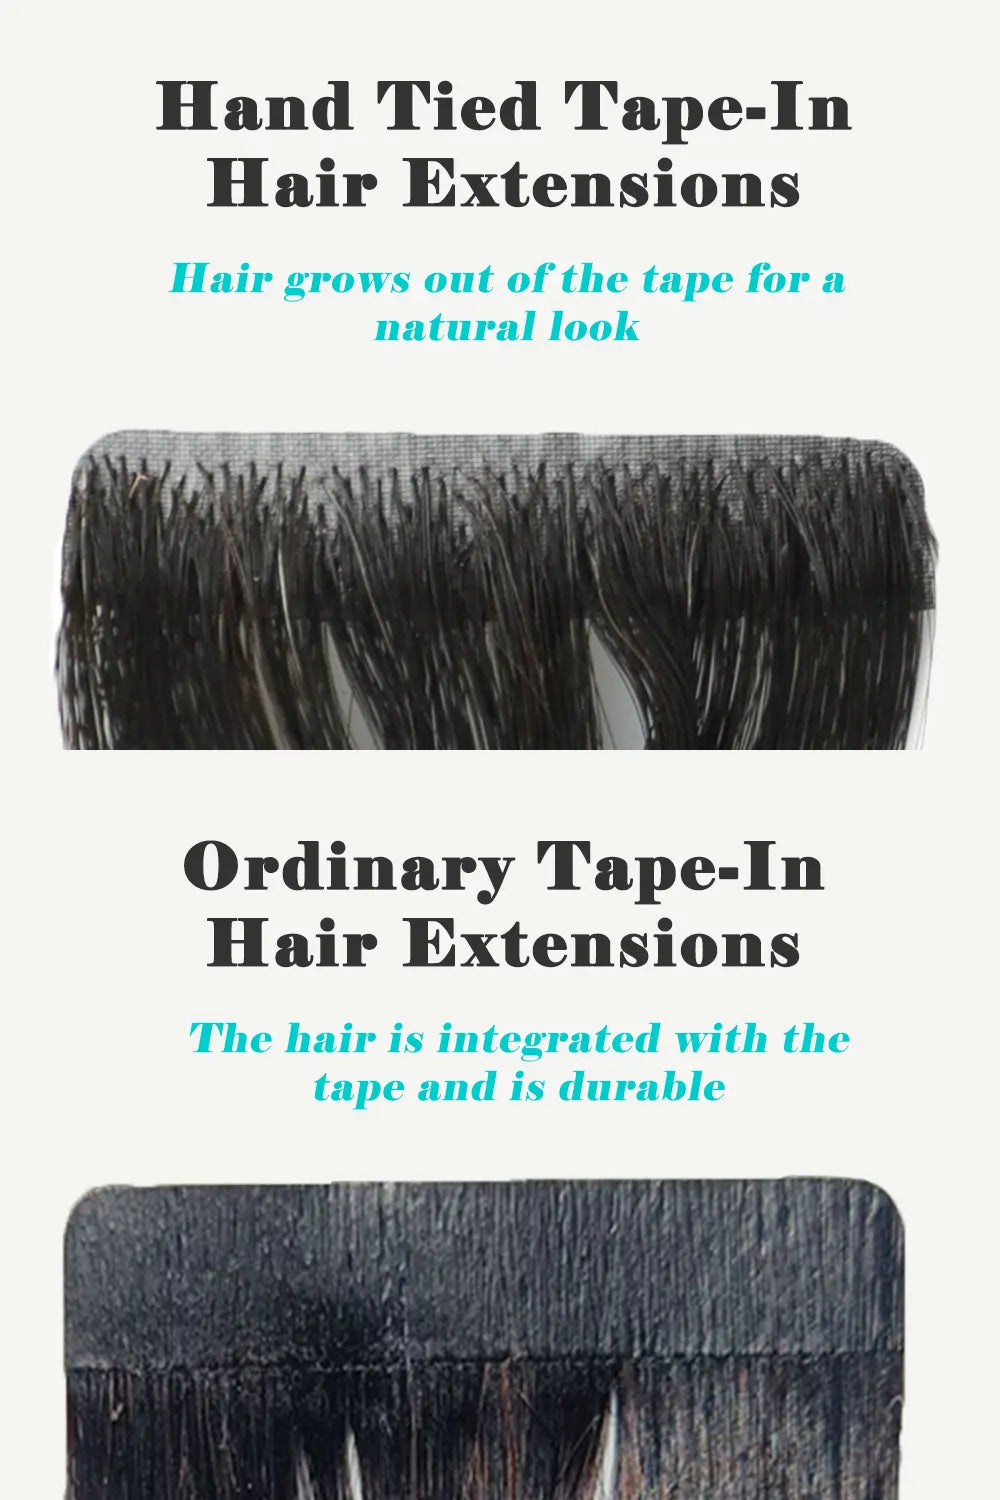 hand-tied-tape-in-hair-extensions-vs-ordinary-tape-in-hair-extensions